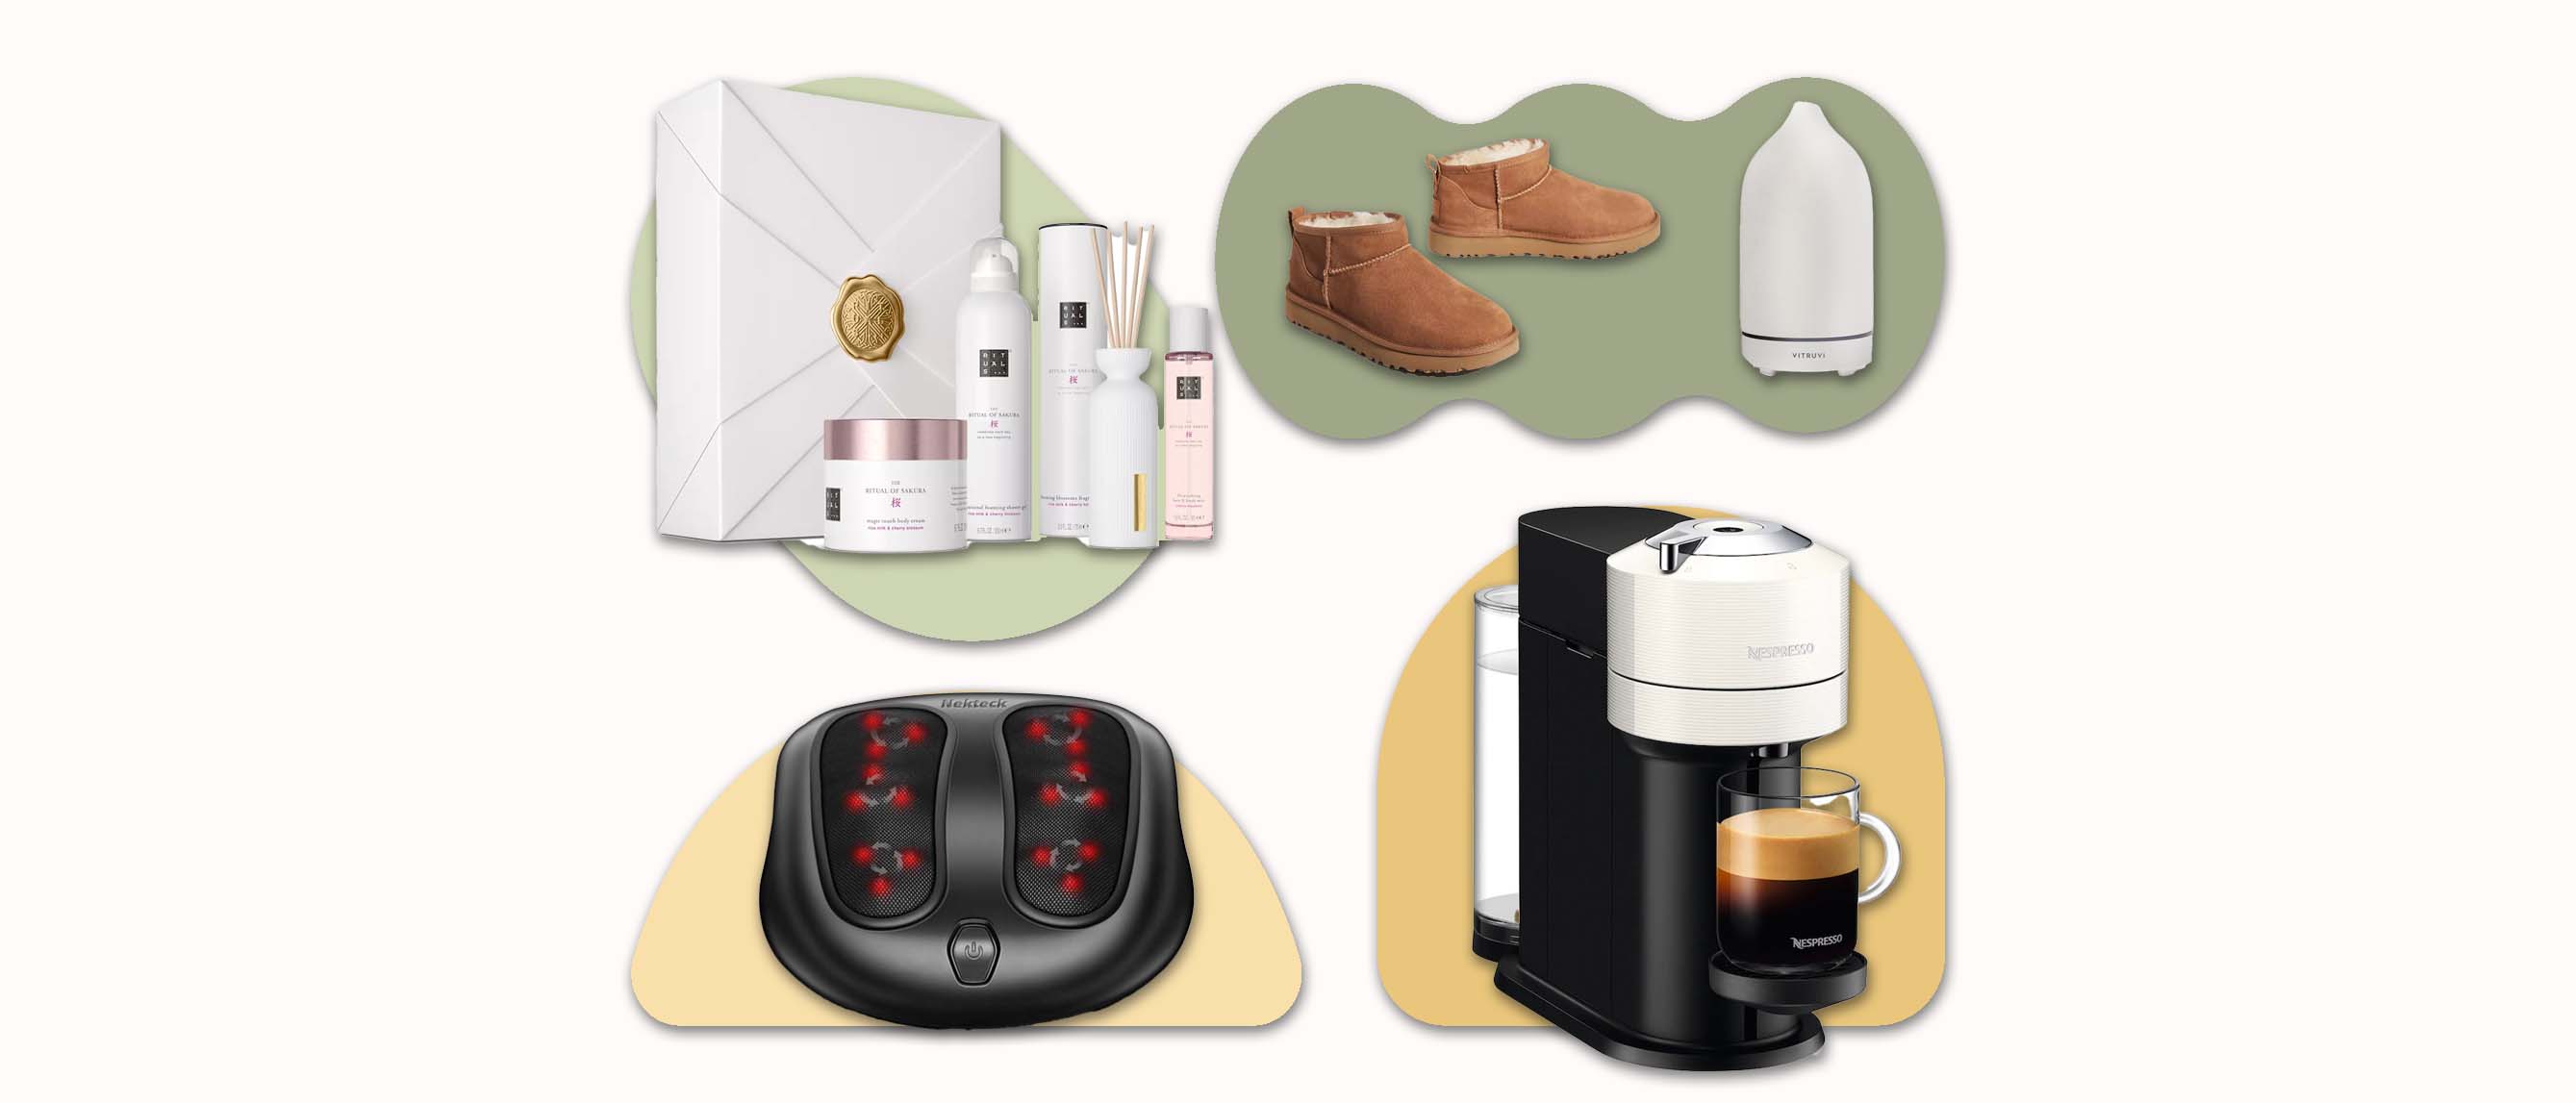 five gifts for mom including a Rituals set, a foot massager, coffee machine, ugg boots and diffuser